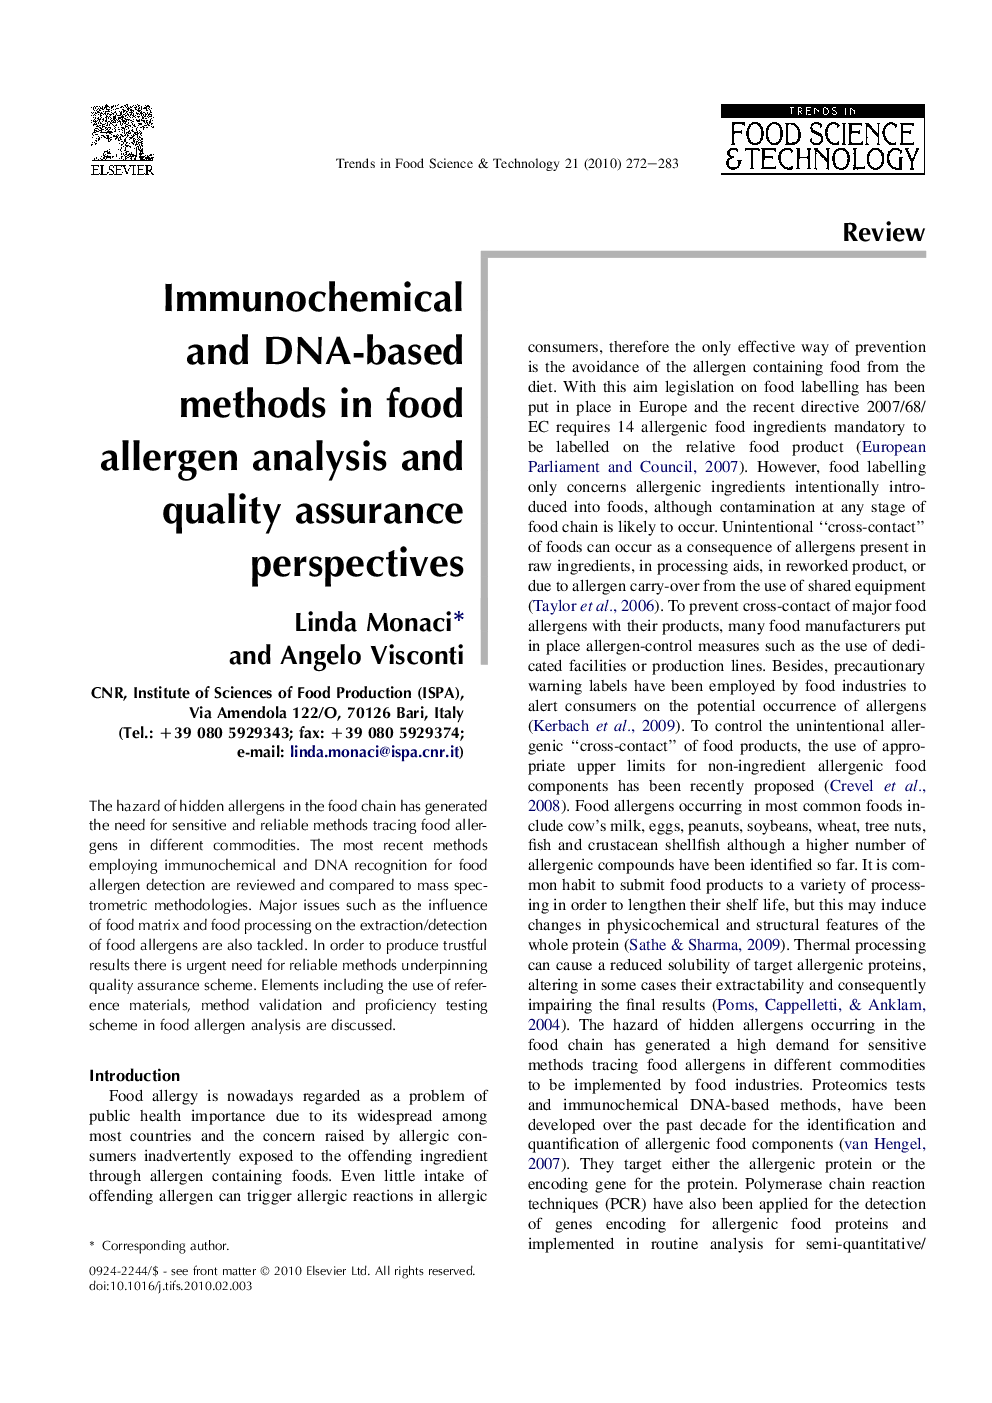 Immunochemical and DNA-based methods in food allergen analysis and quality assurance perspectives